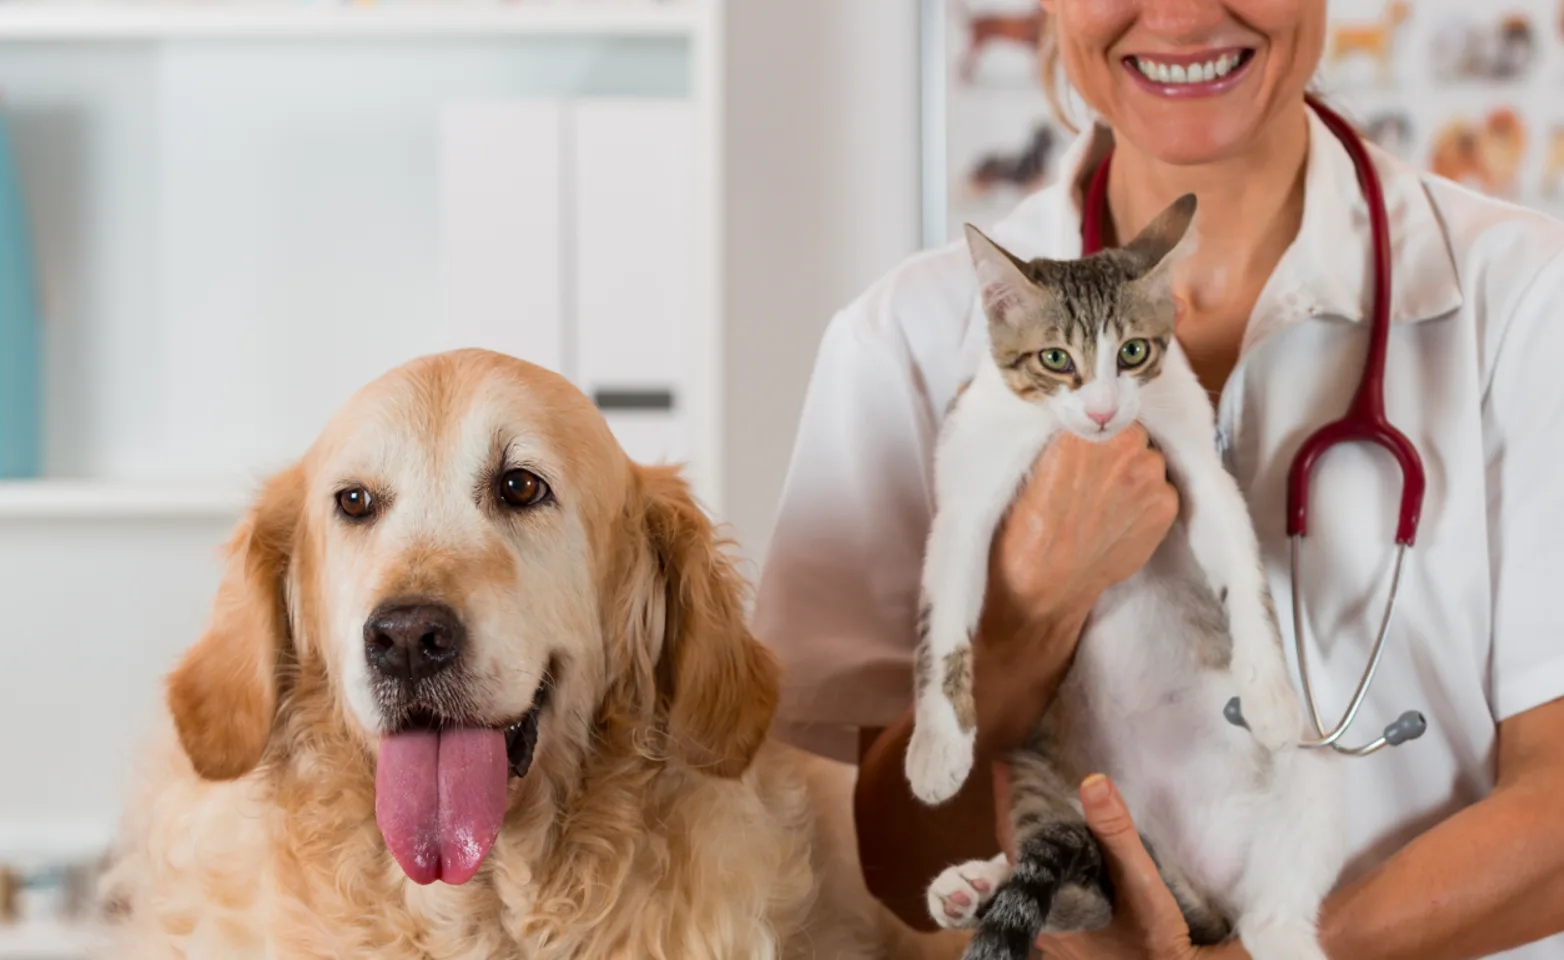 Older dog and cat getting examined by doctor